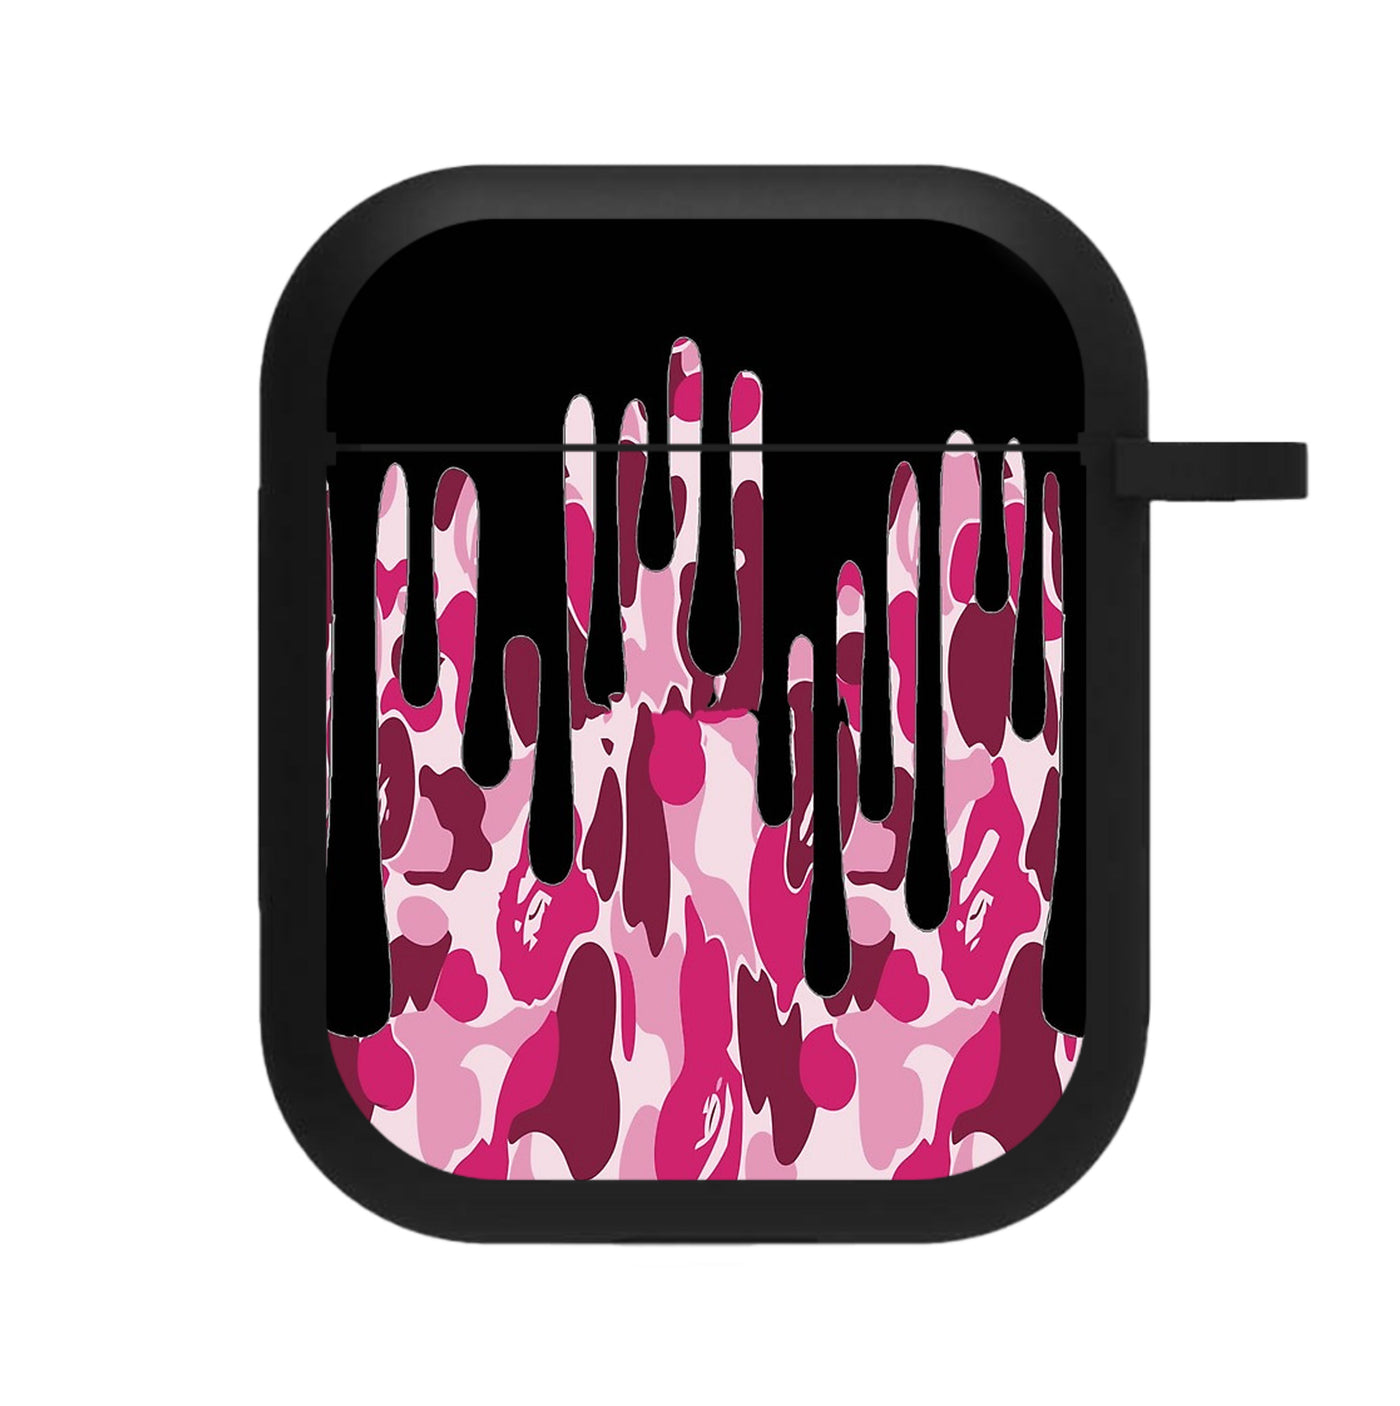 Kylie Jenner - Black & Pink Camo Dripping Cosmetics AirPods Case